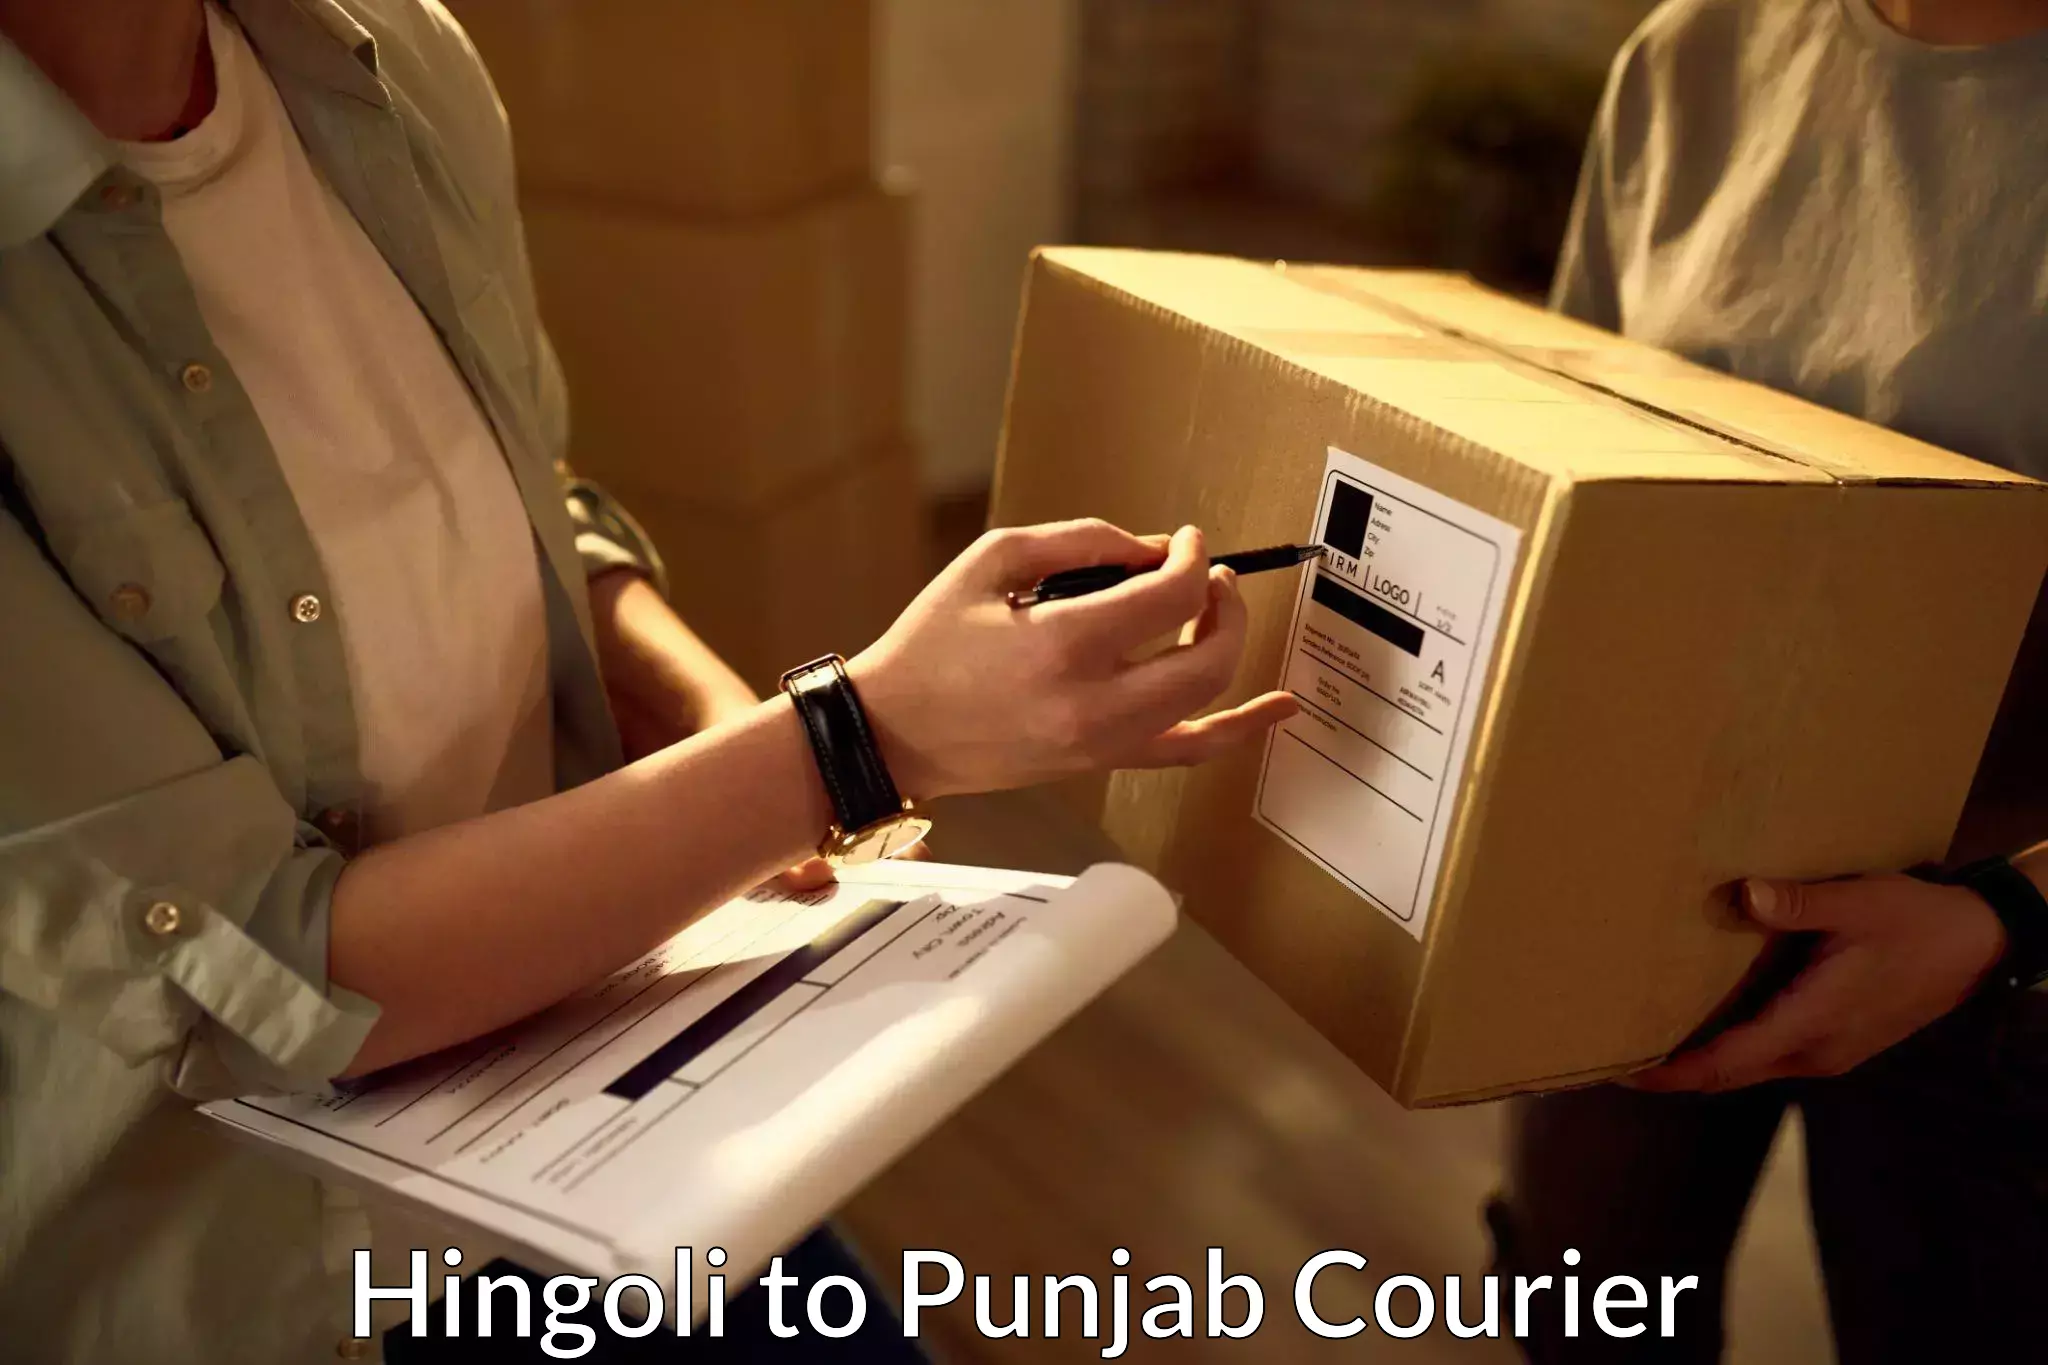 Next-generation courier services Hingoli to Pathankot